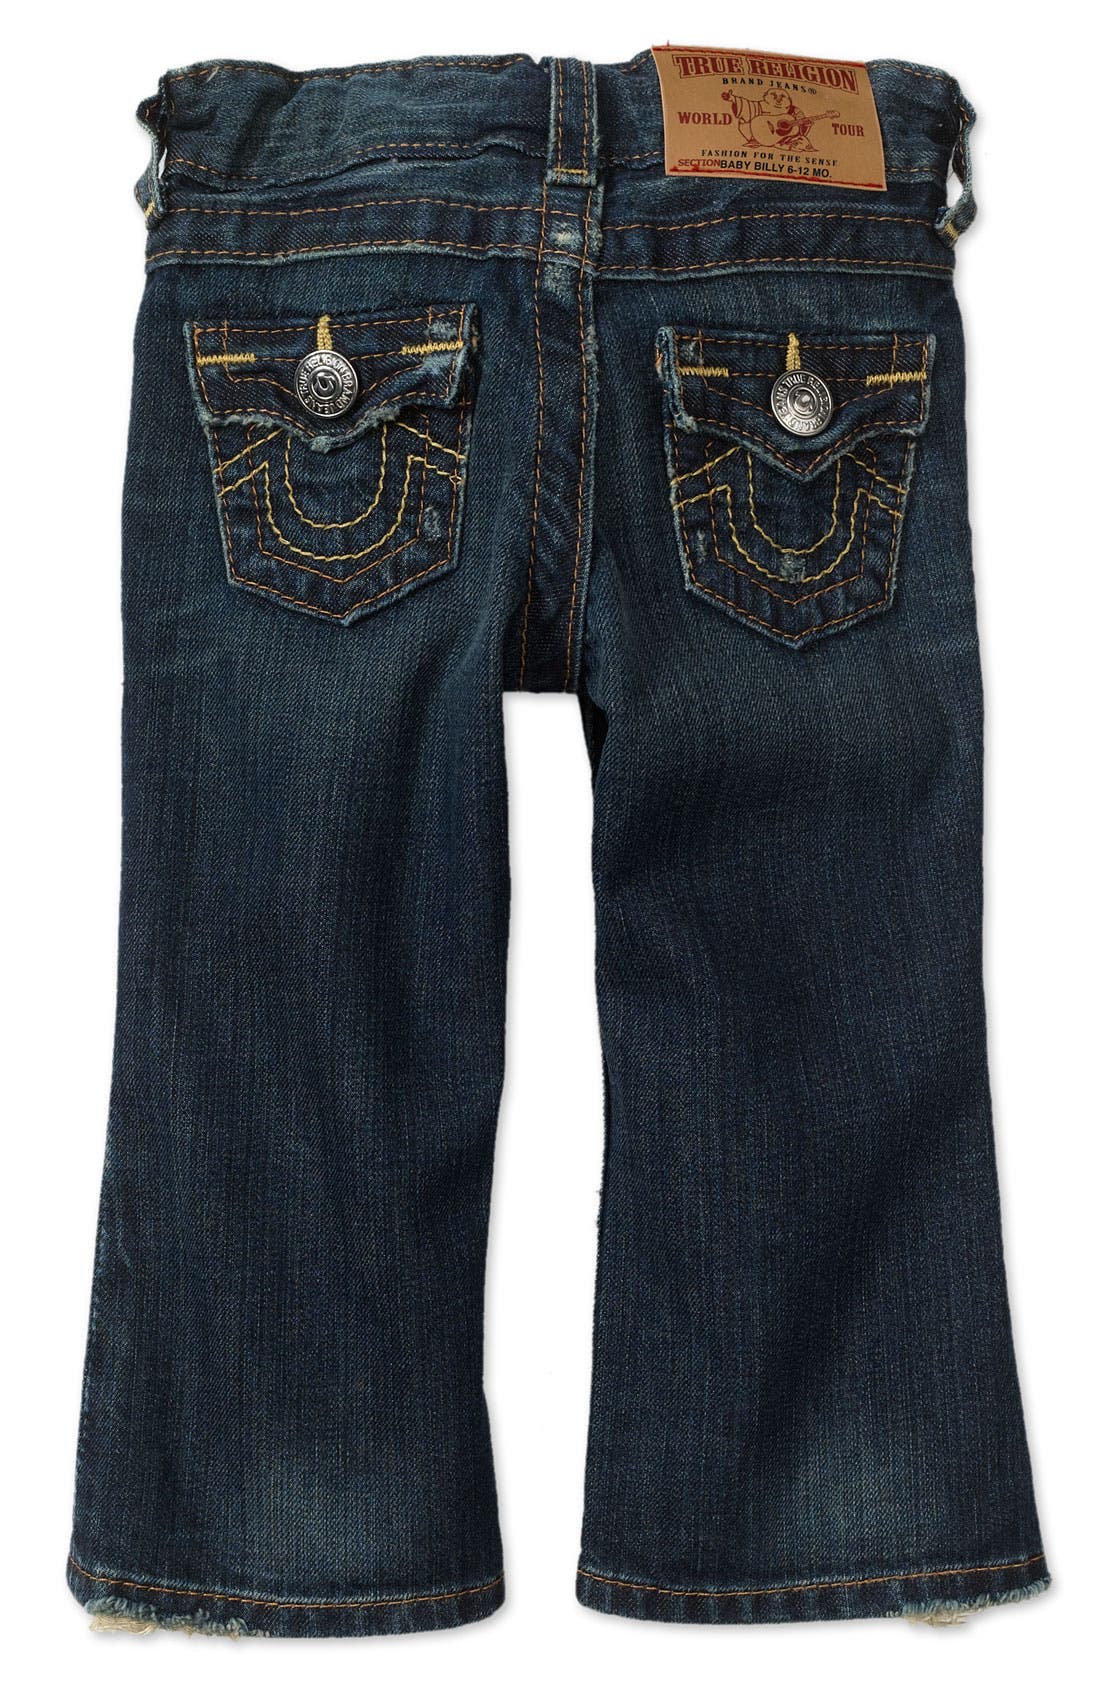 baby true religion outfit